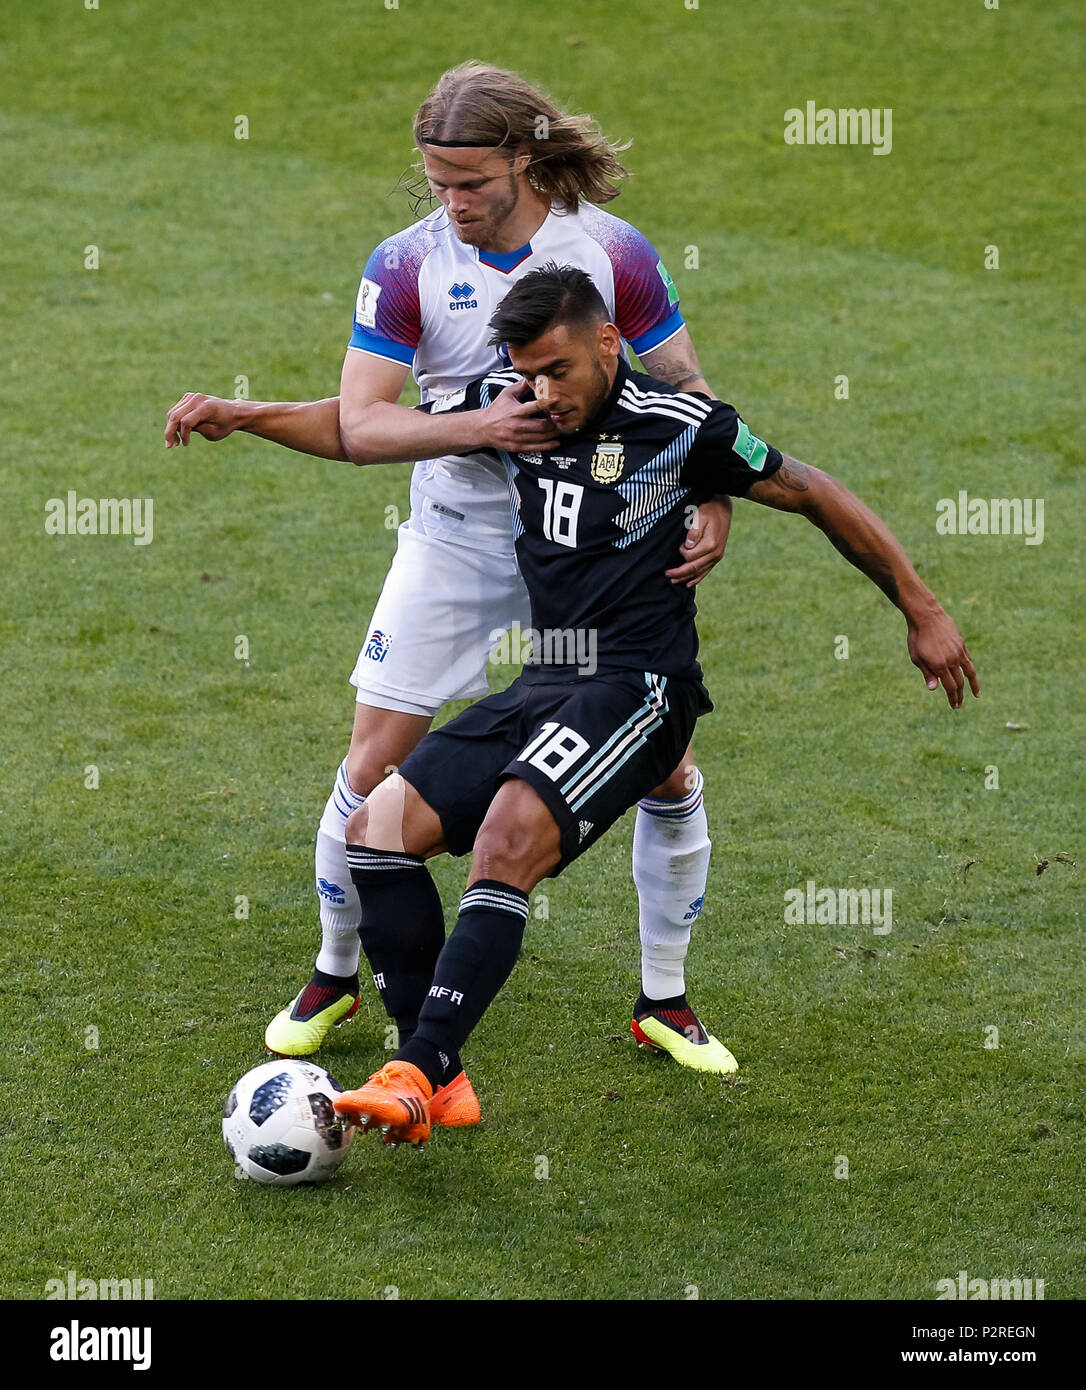 Moscow, Russia. 16th Jun, 2018. Eduardo Salvio of Argentina and Birkir Bjarnason of Iceland during the 2018 FIFA World Cup Group D match between Argentina and Iceland at Spartak Stadium on June 16th 2018 in Moscow, Russia. (Photo by Daniel Chesterton/phcimages.com) Credit: PHC Images/Alamy Live News Stock Photo